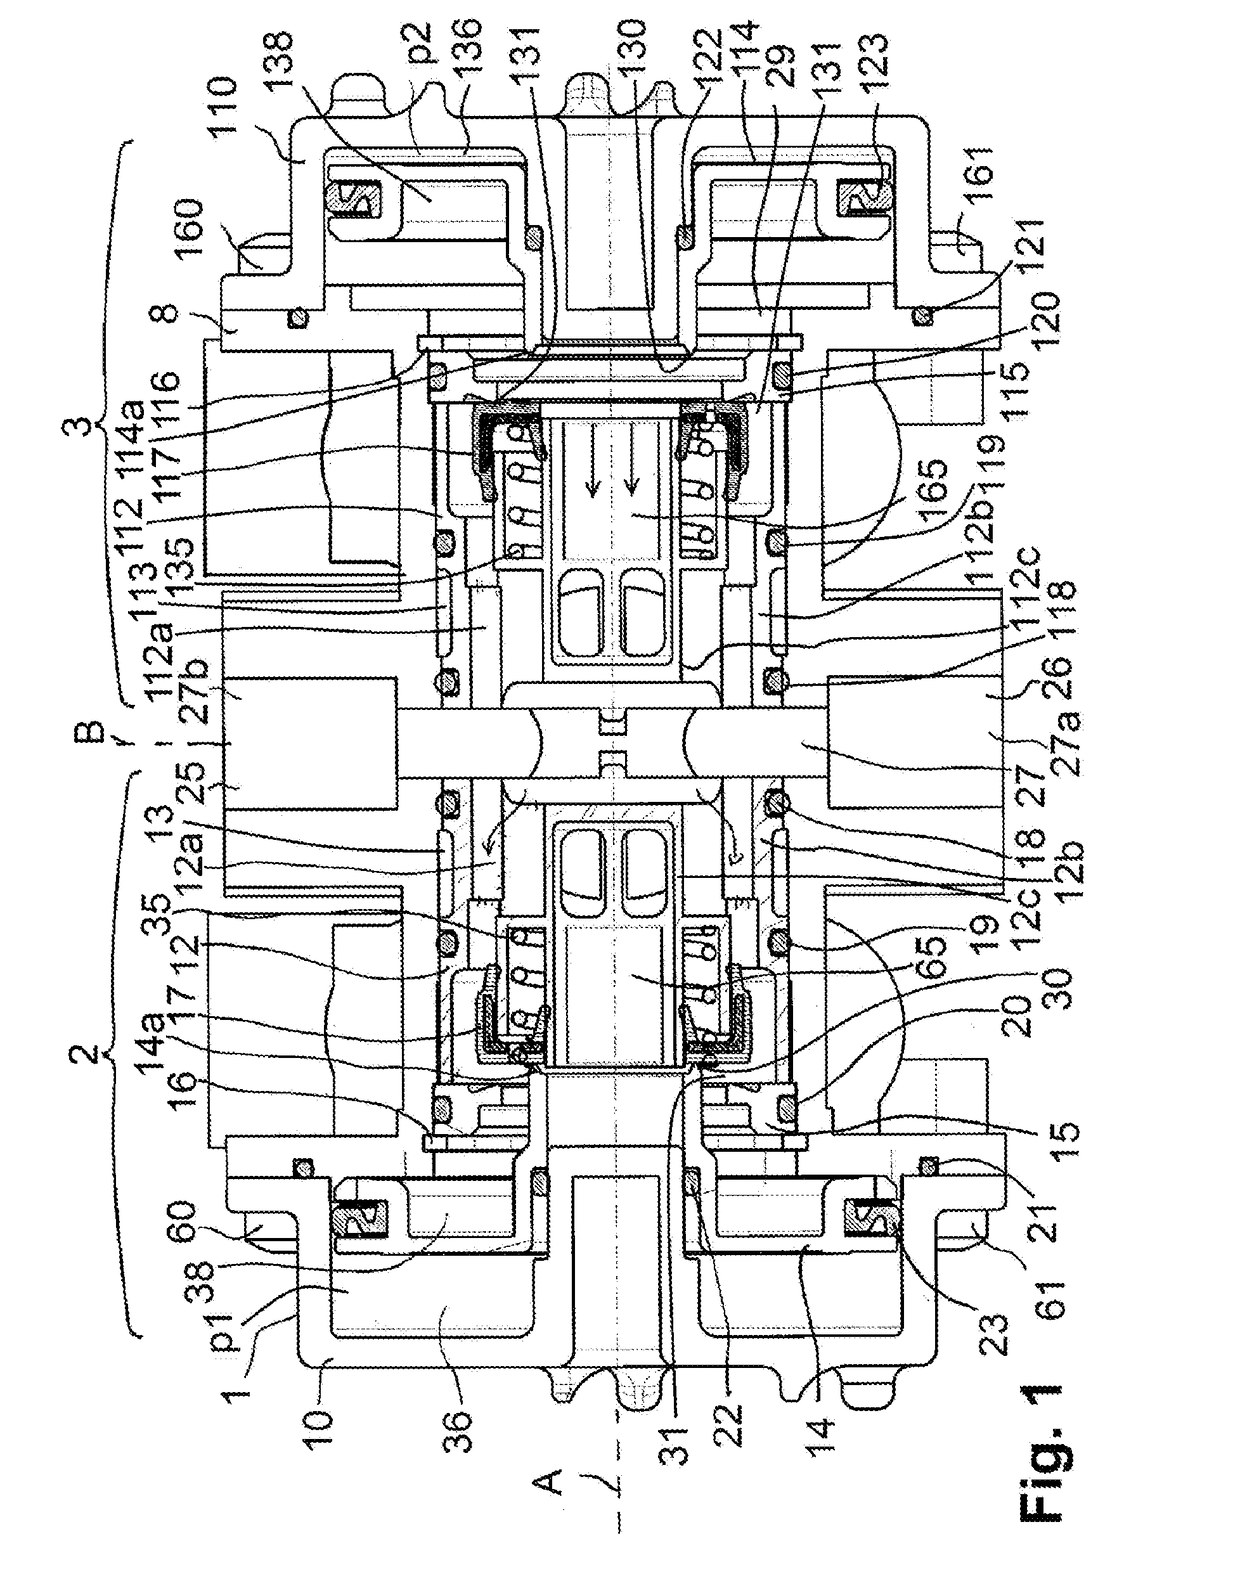 Brake modulator for a compressed air braking system of a vehicle